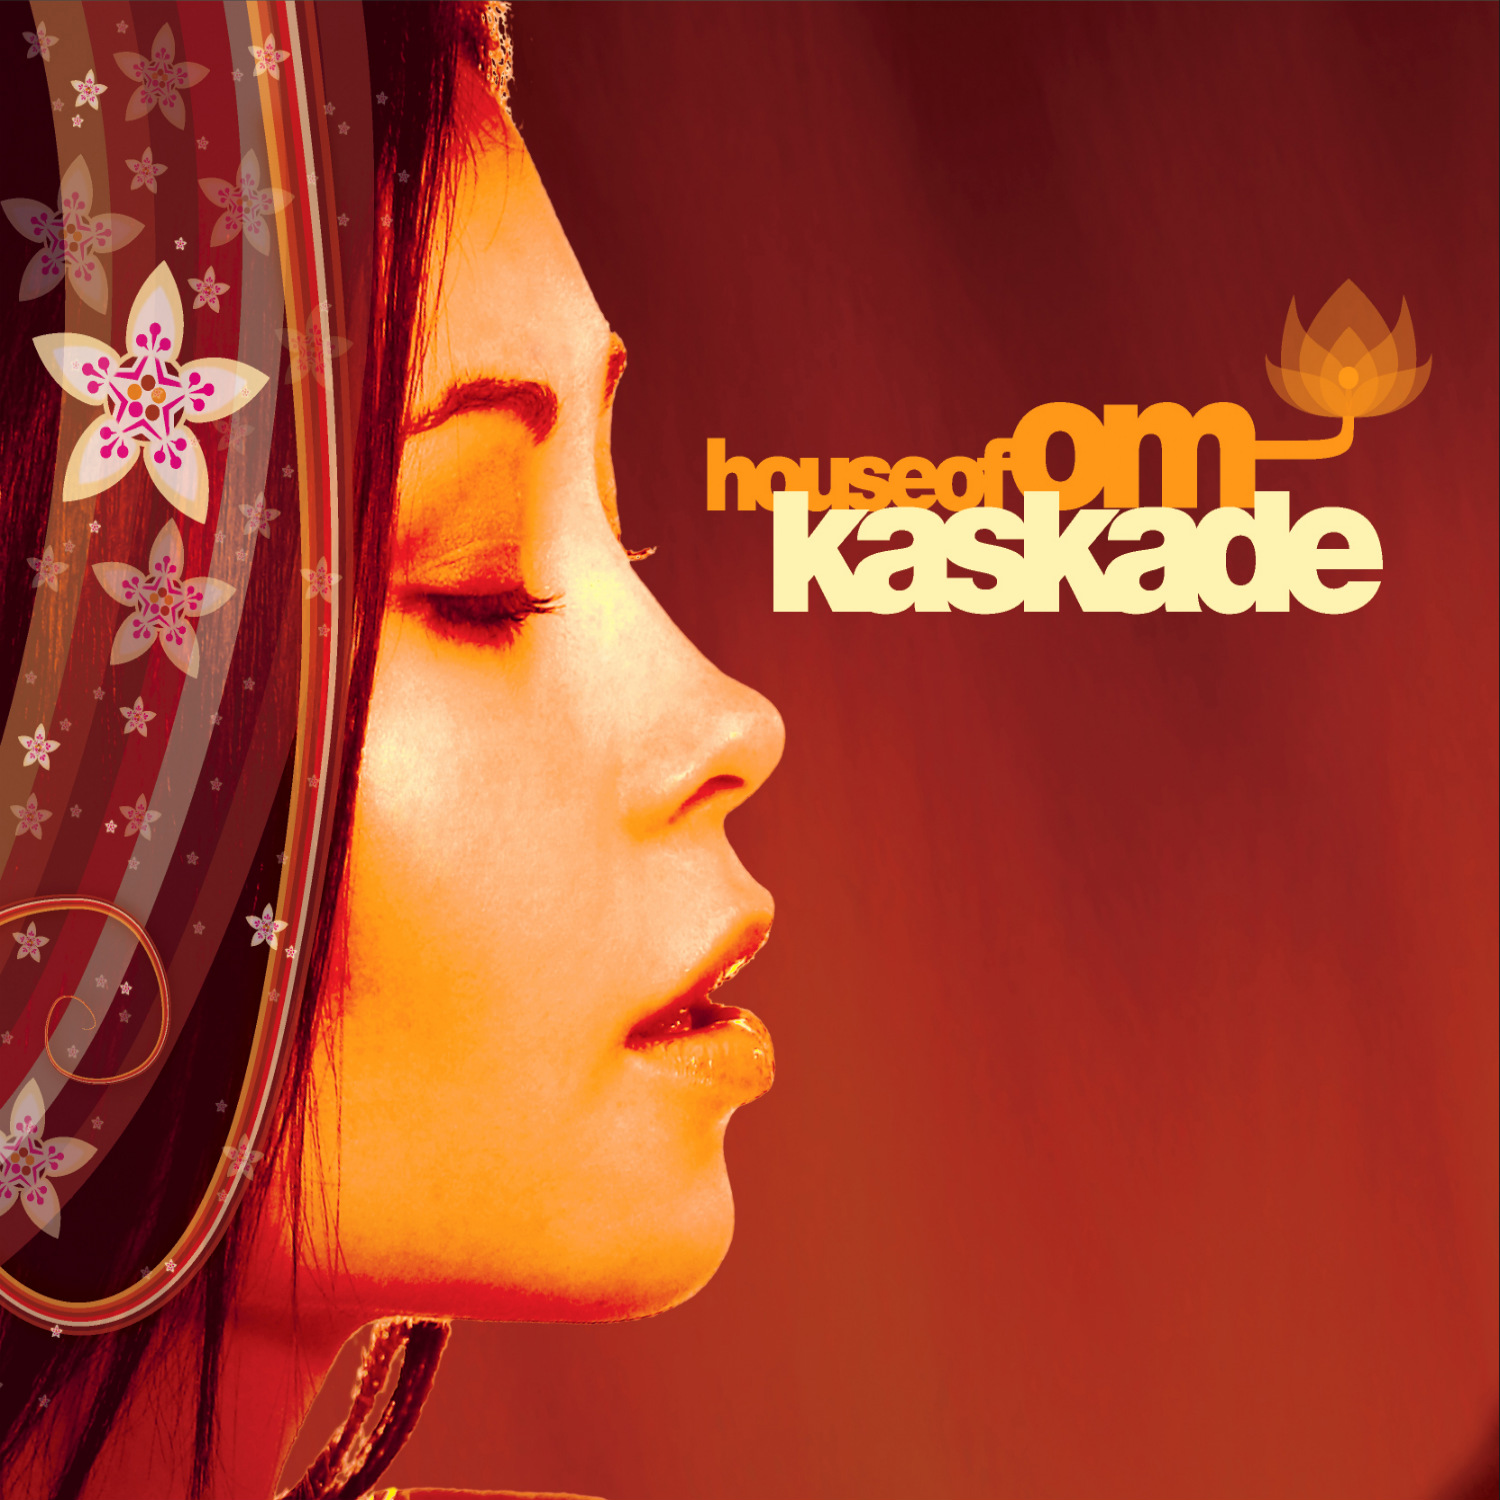 Various Artists - House of Om (Mixed by Kaskade)